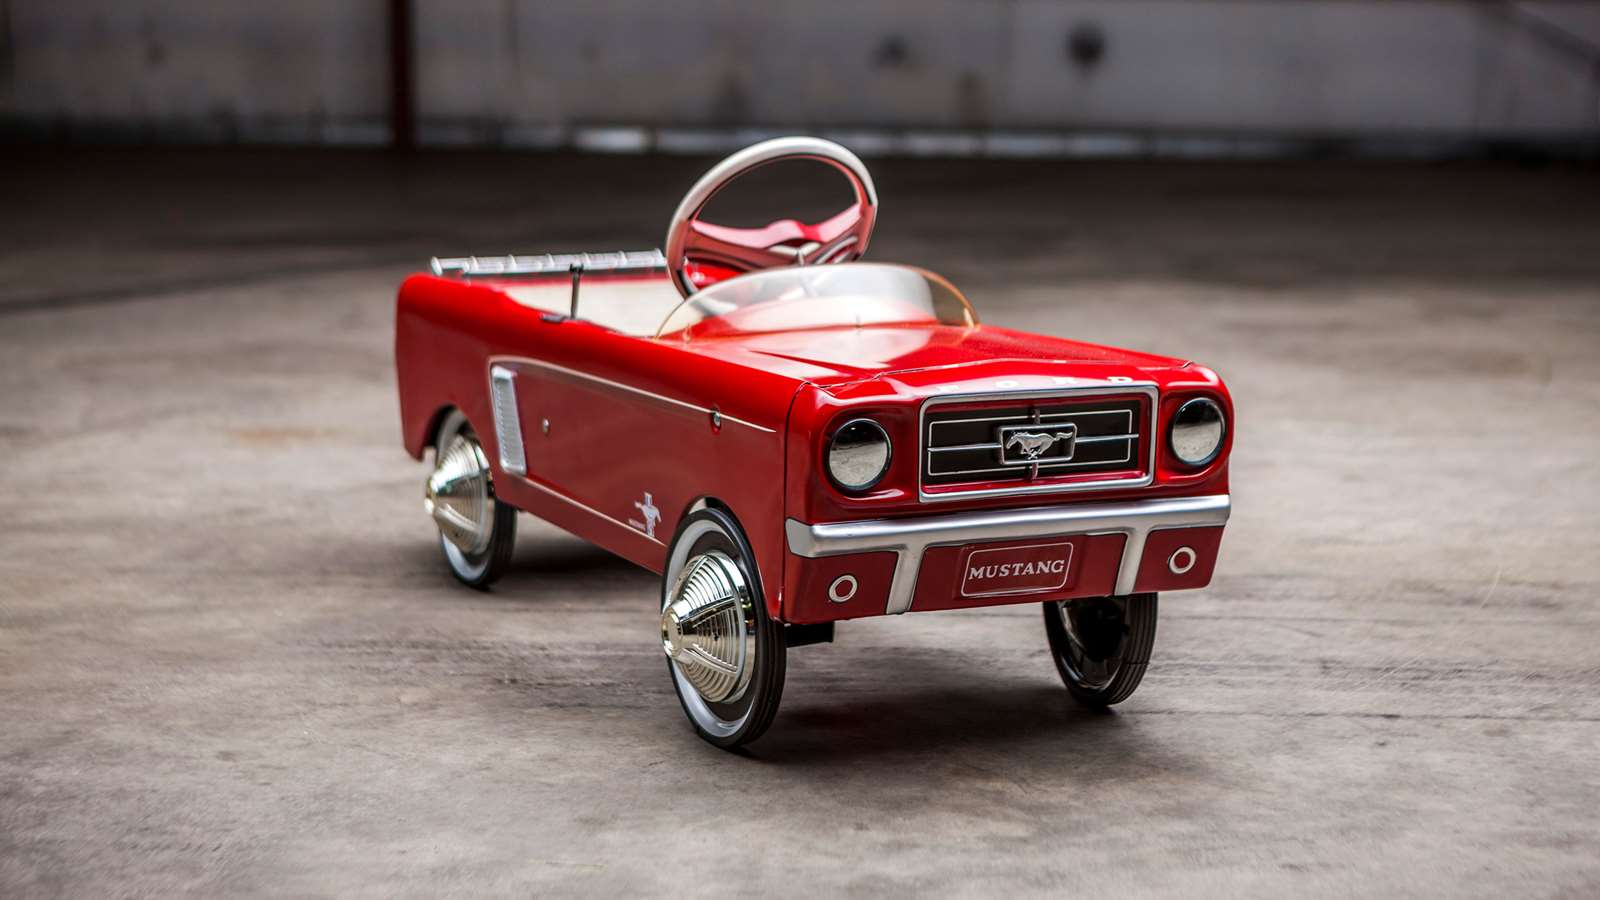 The auction that's dedicated entirely to pedal cars